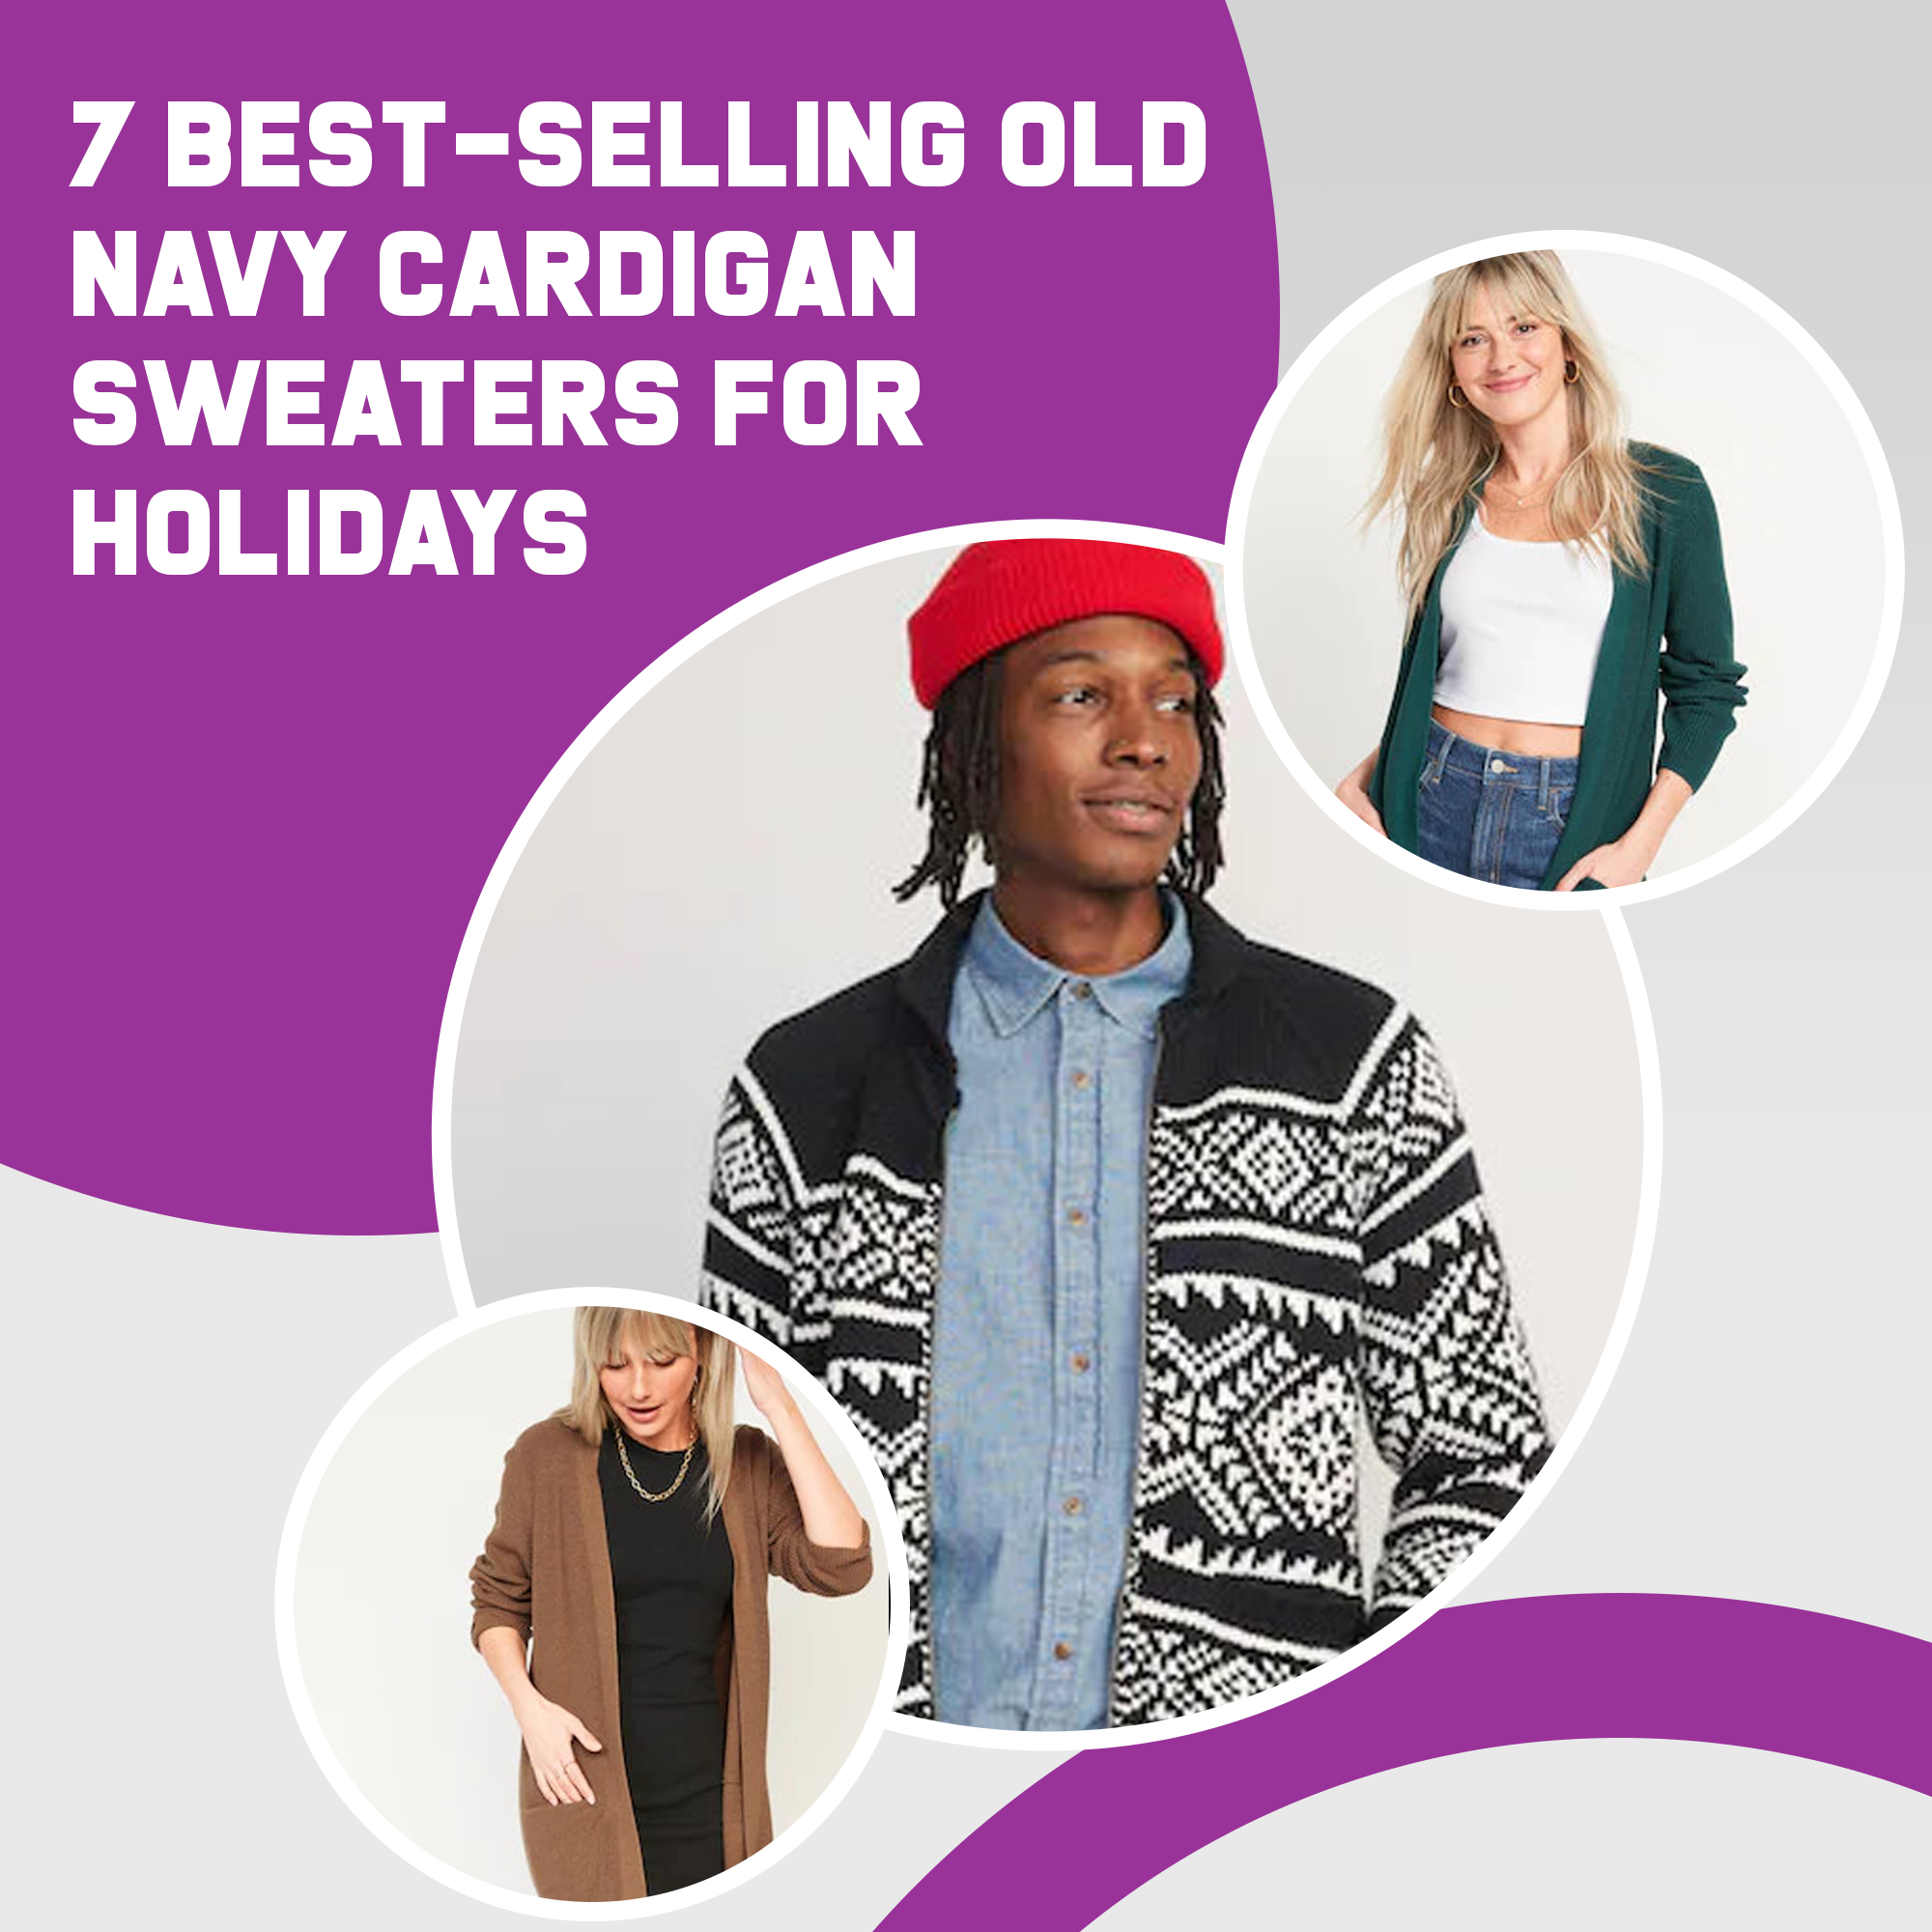 7 Best-Selling Old Navy Cardigan Sweaters For Holidays